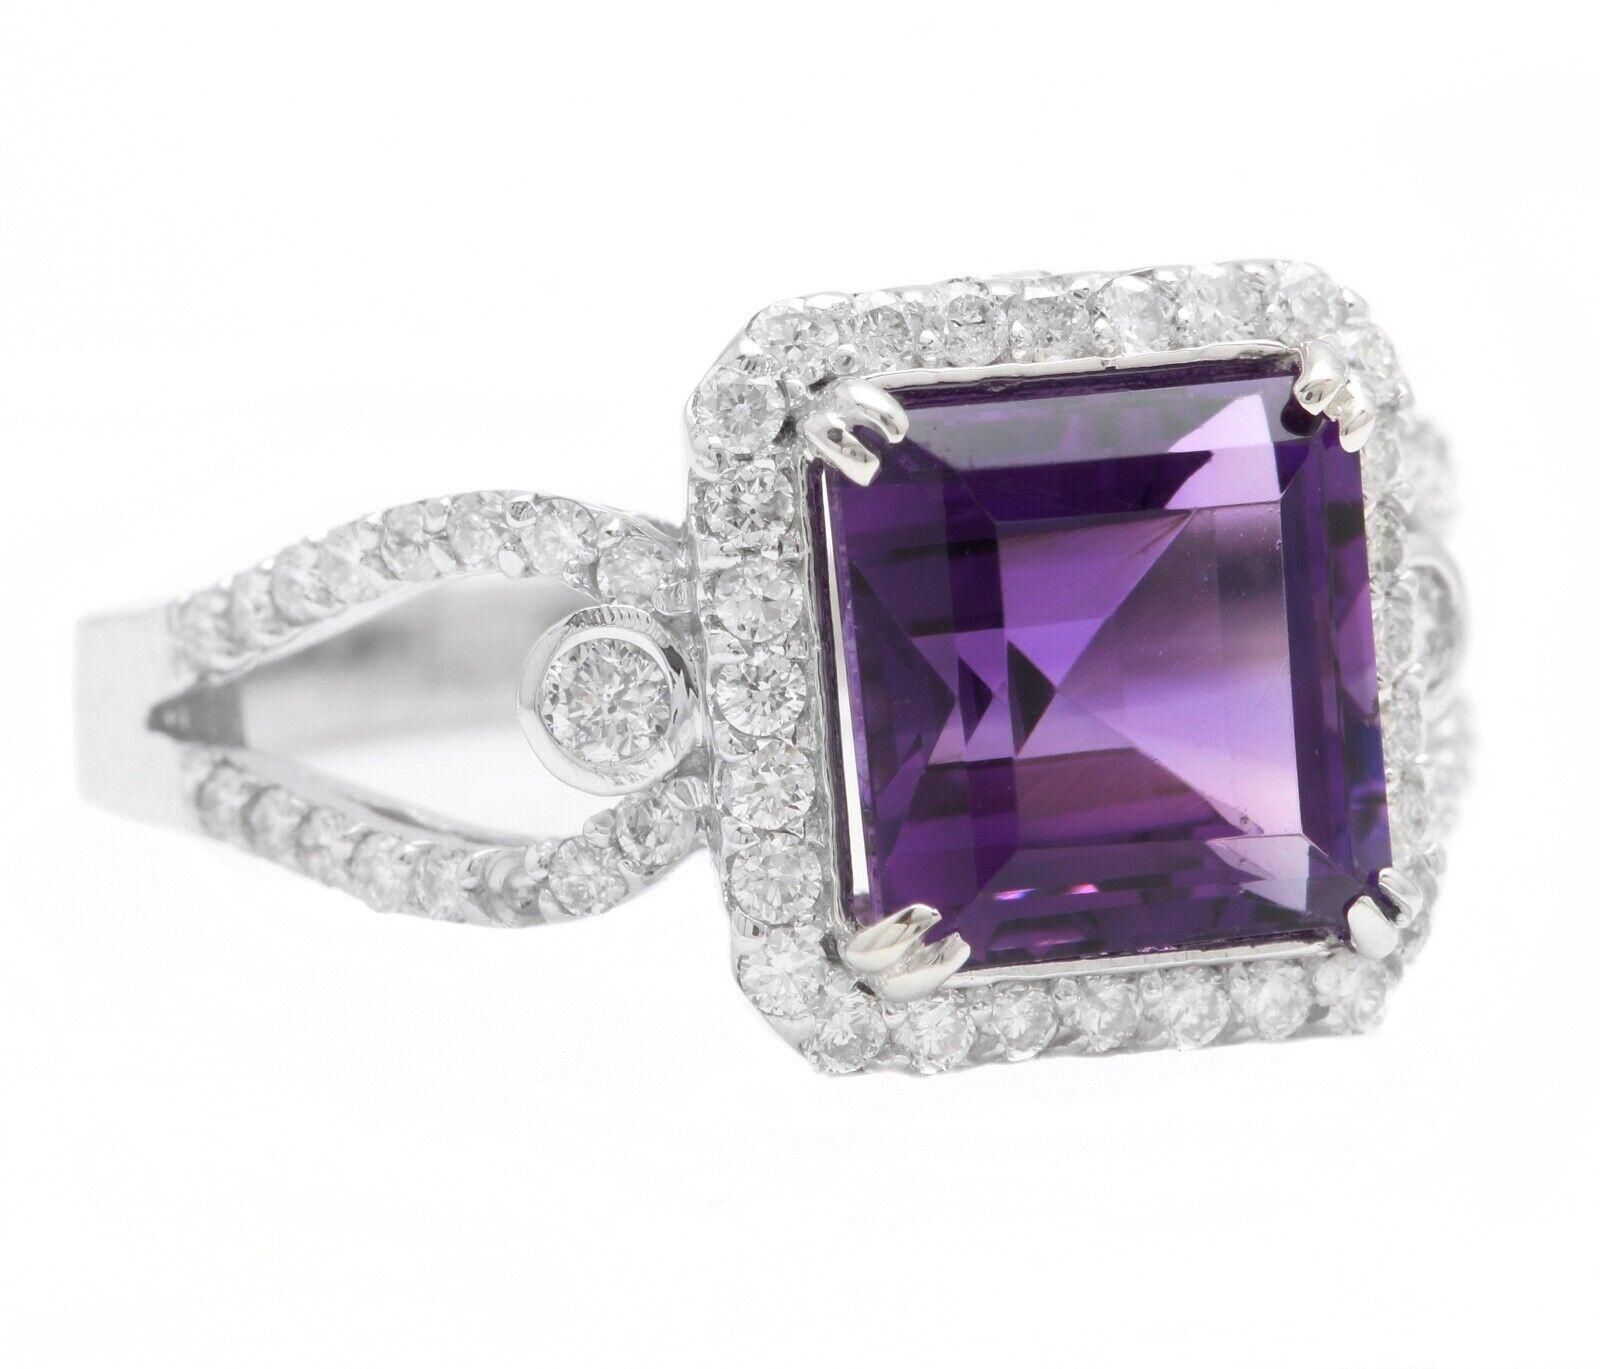 3.60 Carats Natural Amethyst and Diamond 14K Solid White Gold Ring

Suggested Replacement Value $4,500.00

Total Natural Square Cut Amethyst Weights: Approx. 3.00 Carats 

Amethyst Measures: Approx. 8.00 x 8.00 mm

Natural Round Diamonds Weight: